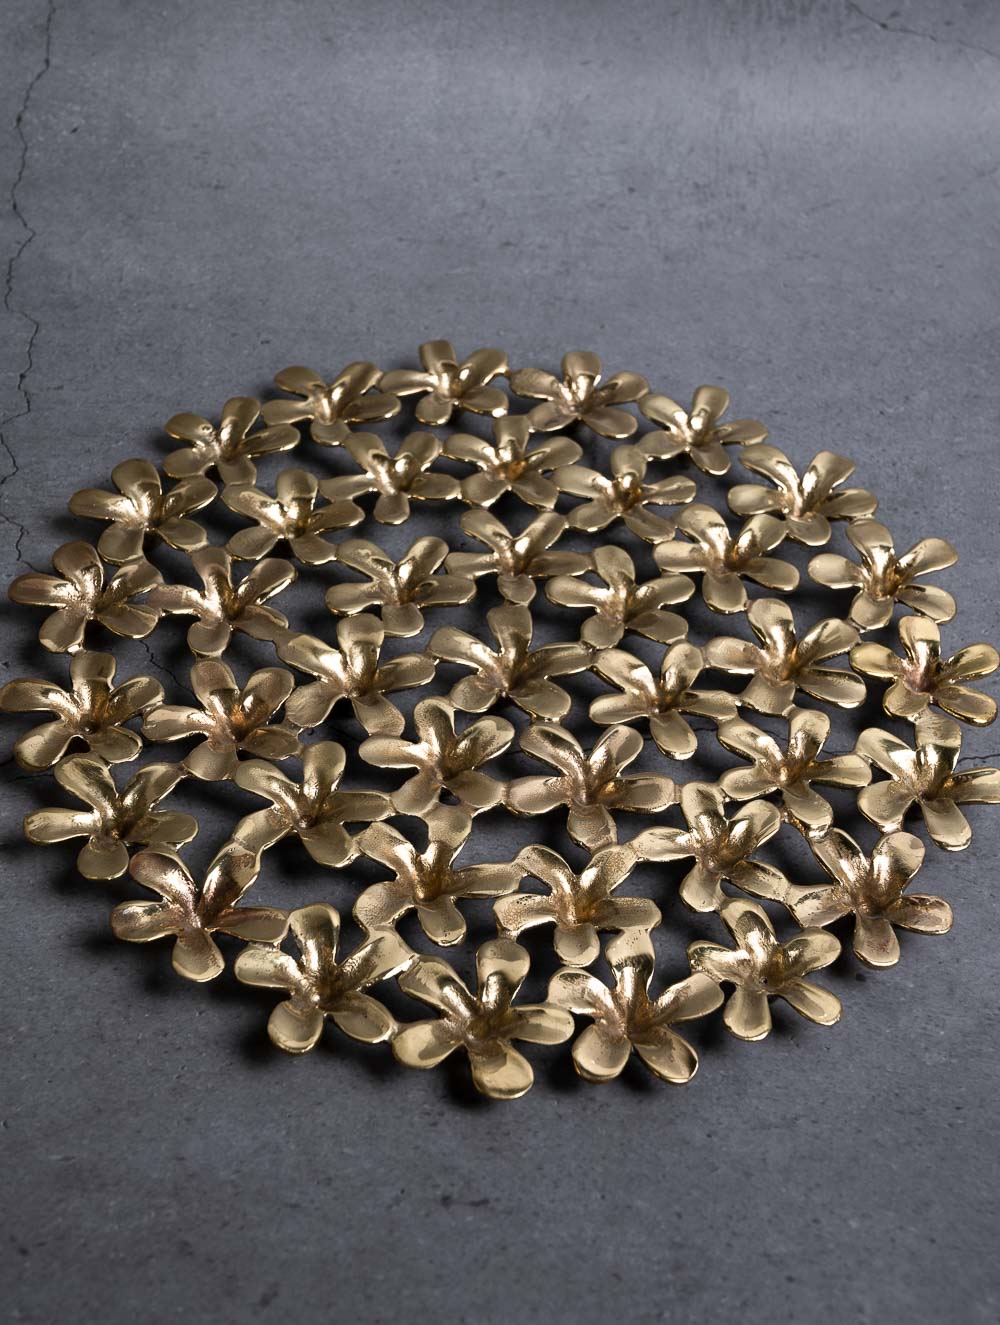 Load image into Gallery viewer, Exclusive Brass Curio / Trivet - Champa Flowers